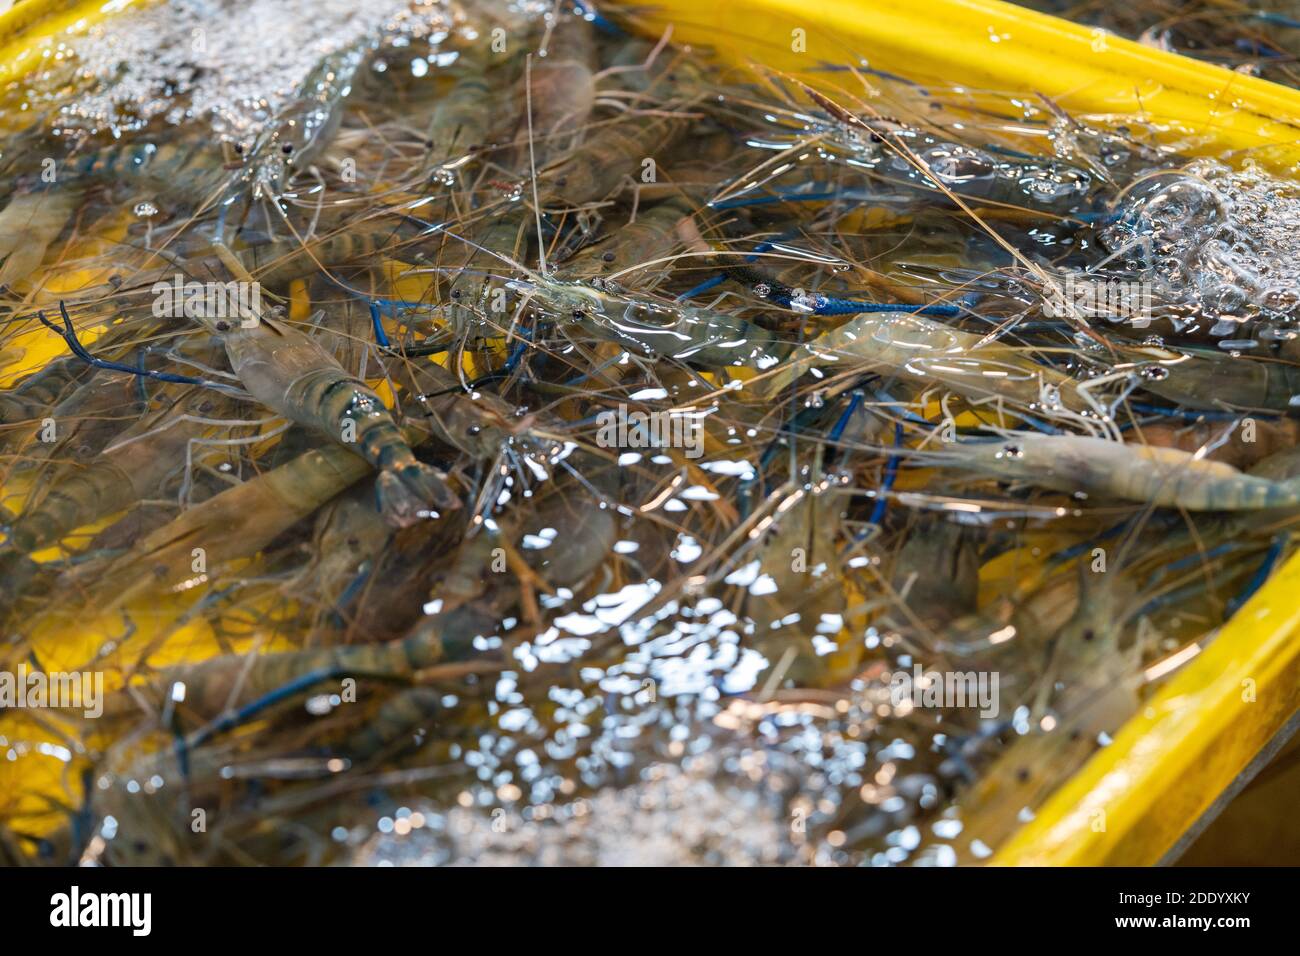 fresh blue prawns swim in the tank for sales and cook at Asia local fresh market. Stock Photo